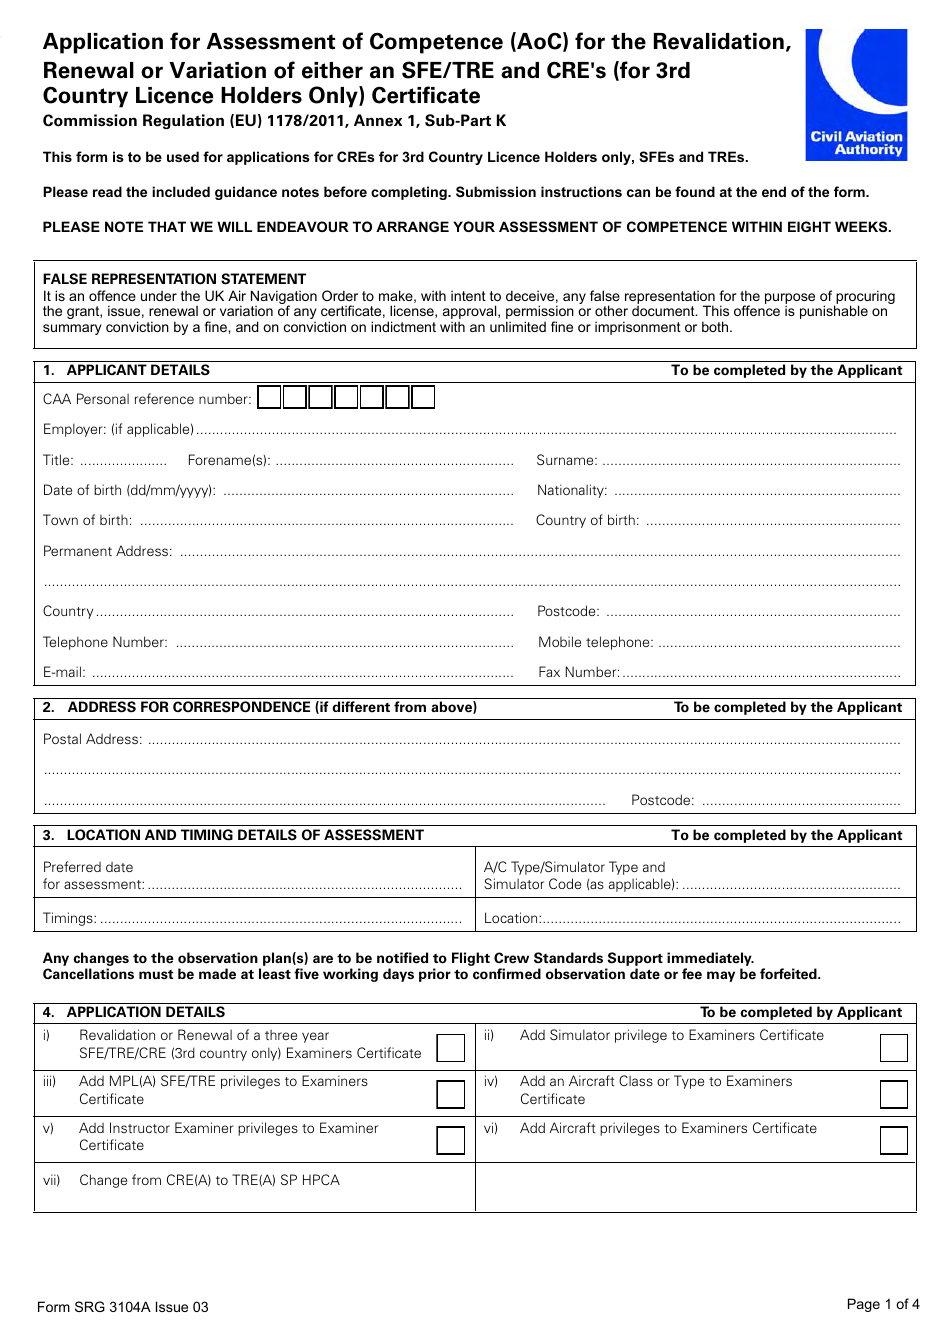 Form SRG3104A Application for Assessment of Competence (Aoc) for the Revalidation, Renewal or Variation of Either an Sfe / Tre and Cres (For 3rd Country Licence Holders Only) Certificate - United Kingdom, Page 1